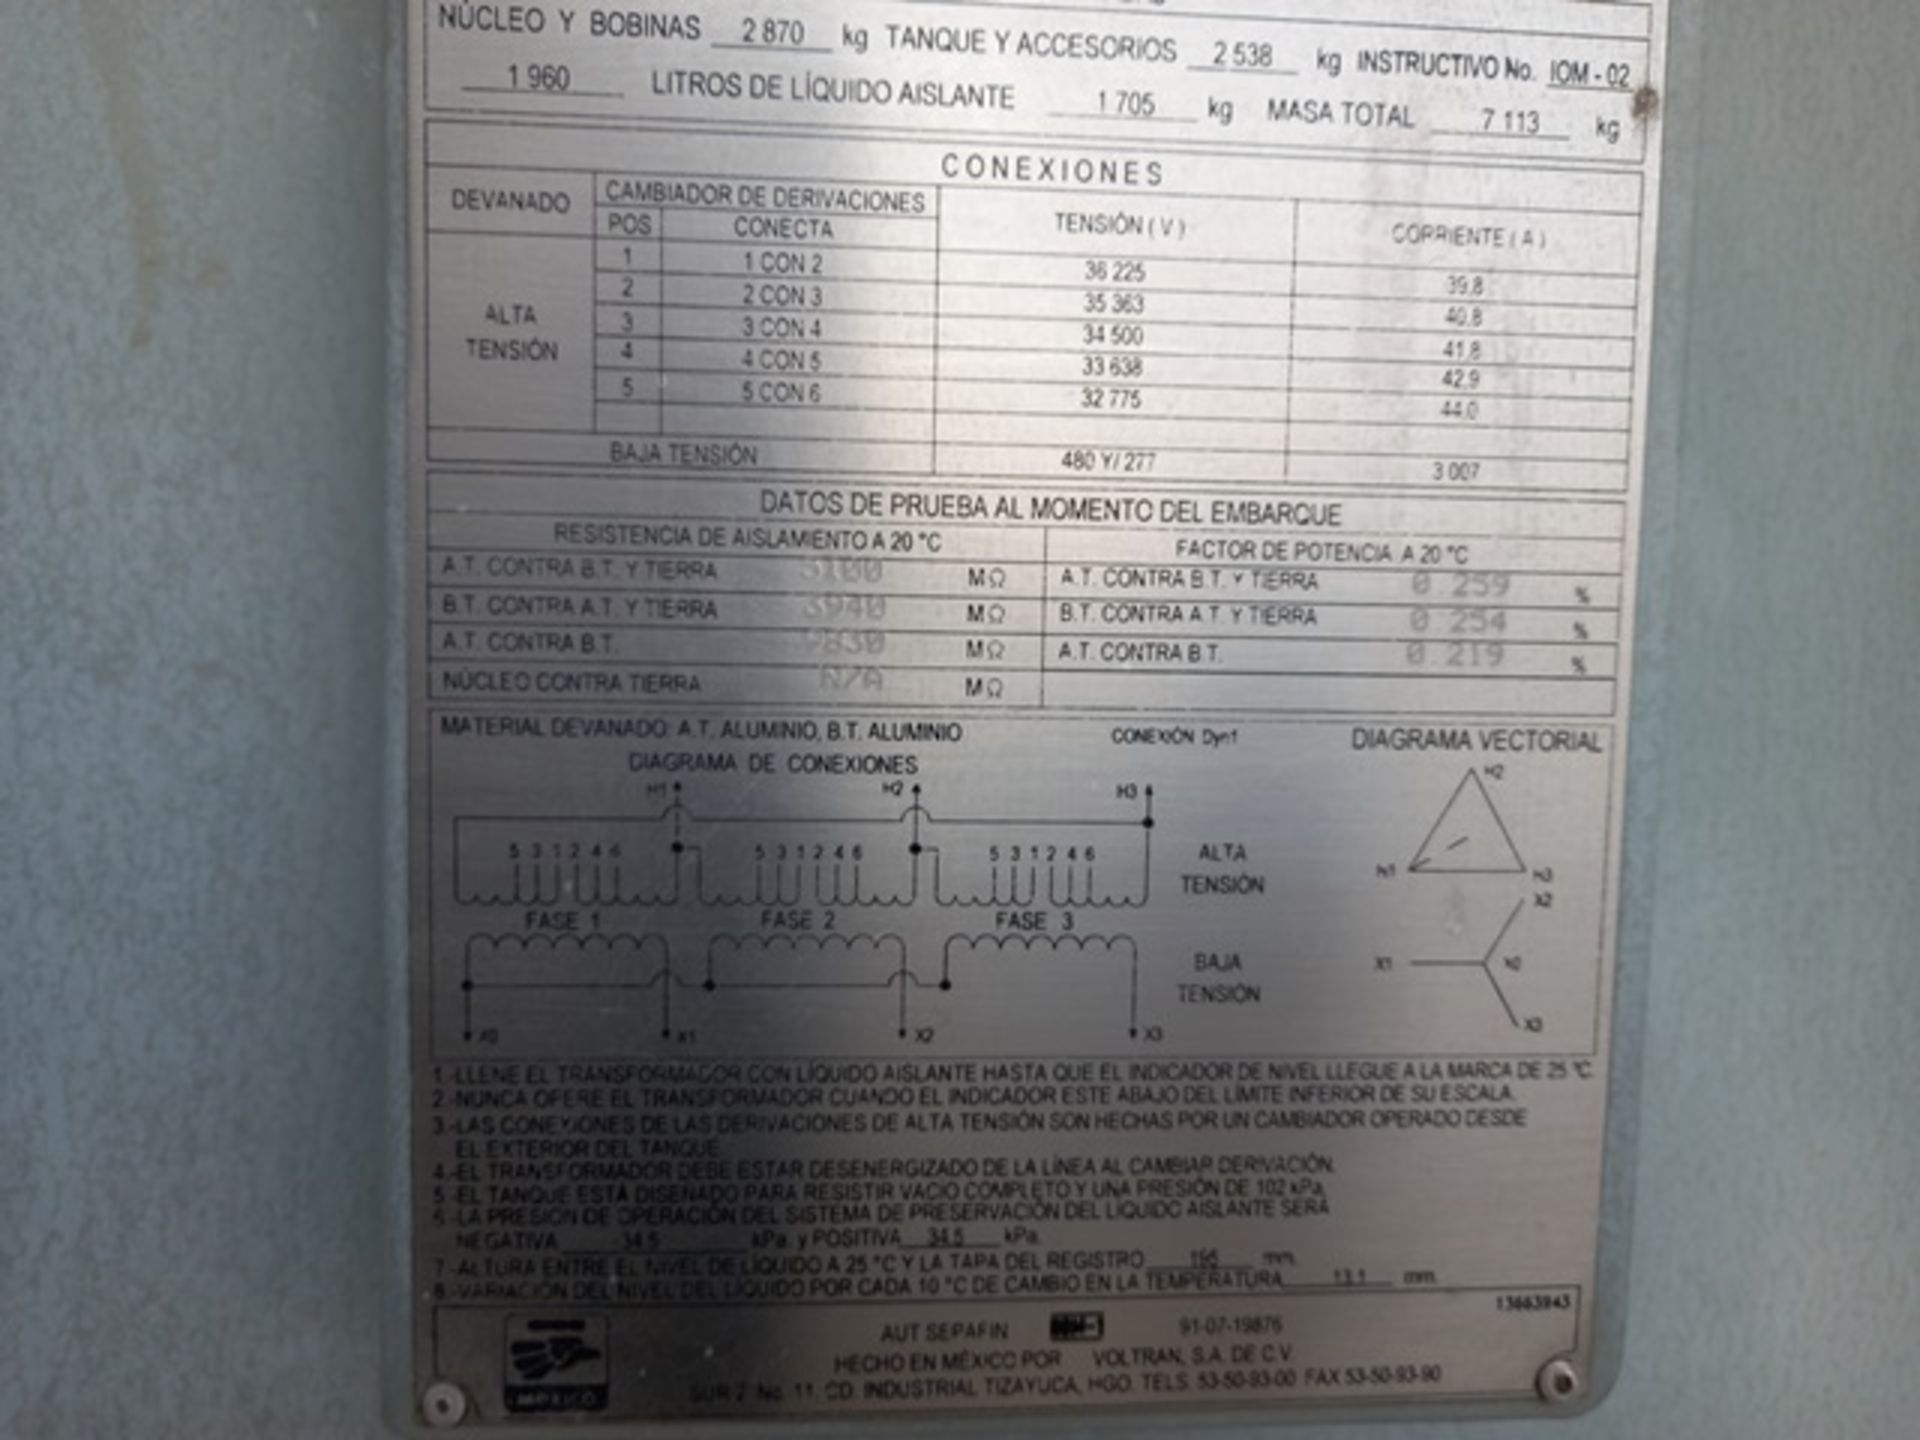 2500 KVA Electric Transformer, 34,500-480Y/277 V, Serial Number: 1032904744, Year 2016 - Image 7 of 7